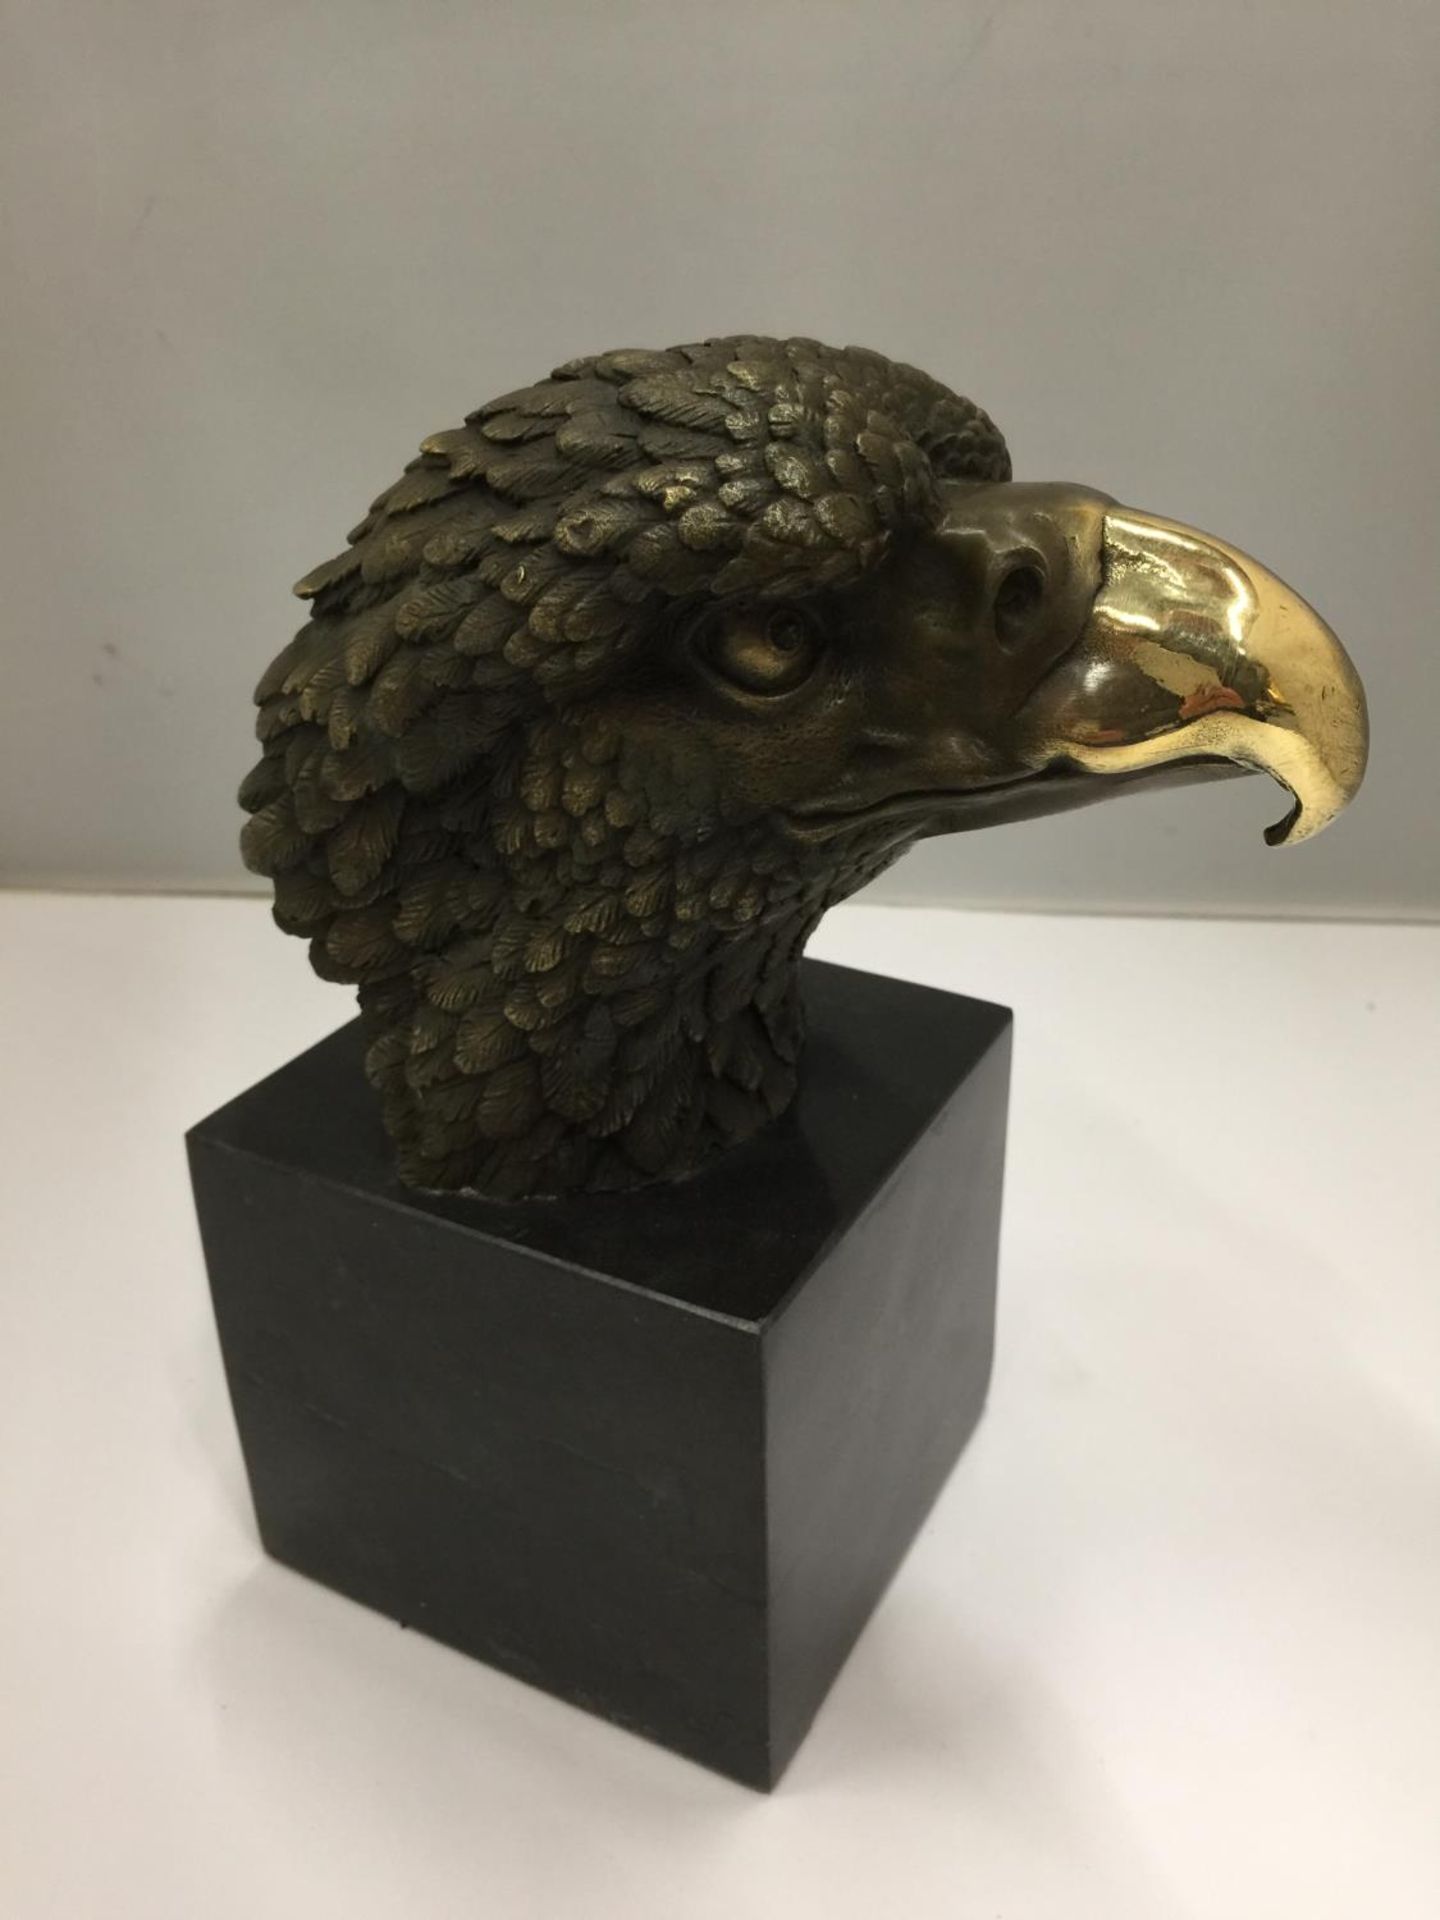 A BRONZE AMERICAN EAGLE BUST ON A MARBLE BASE HEIGHT 21CM - Image 2 of 4